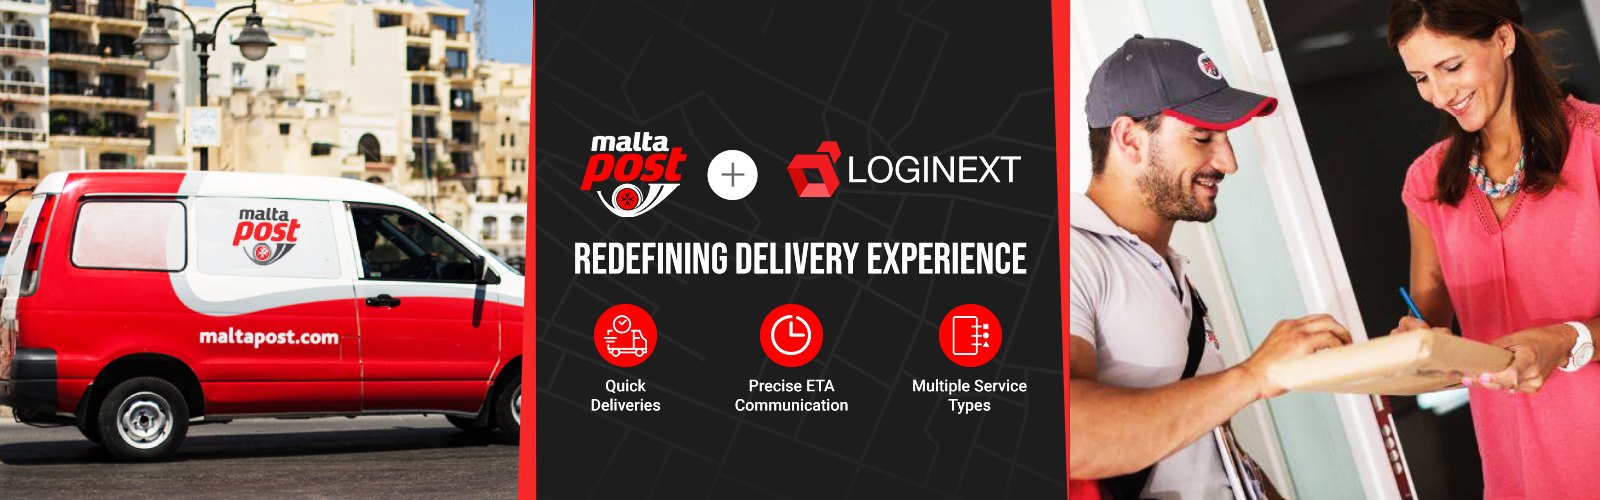 Malta Post ties up with LogiNext